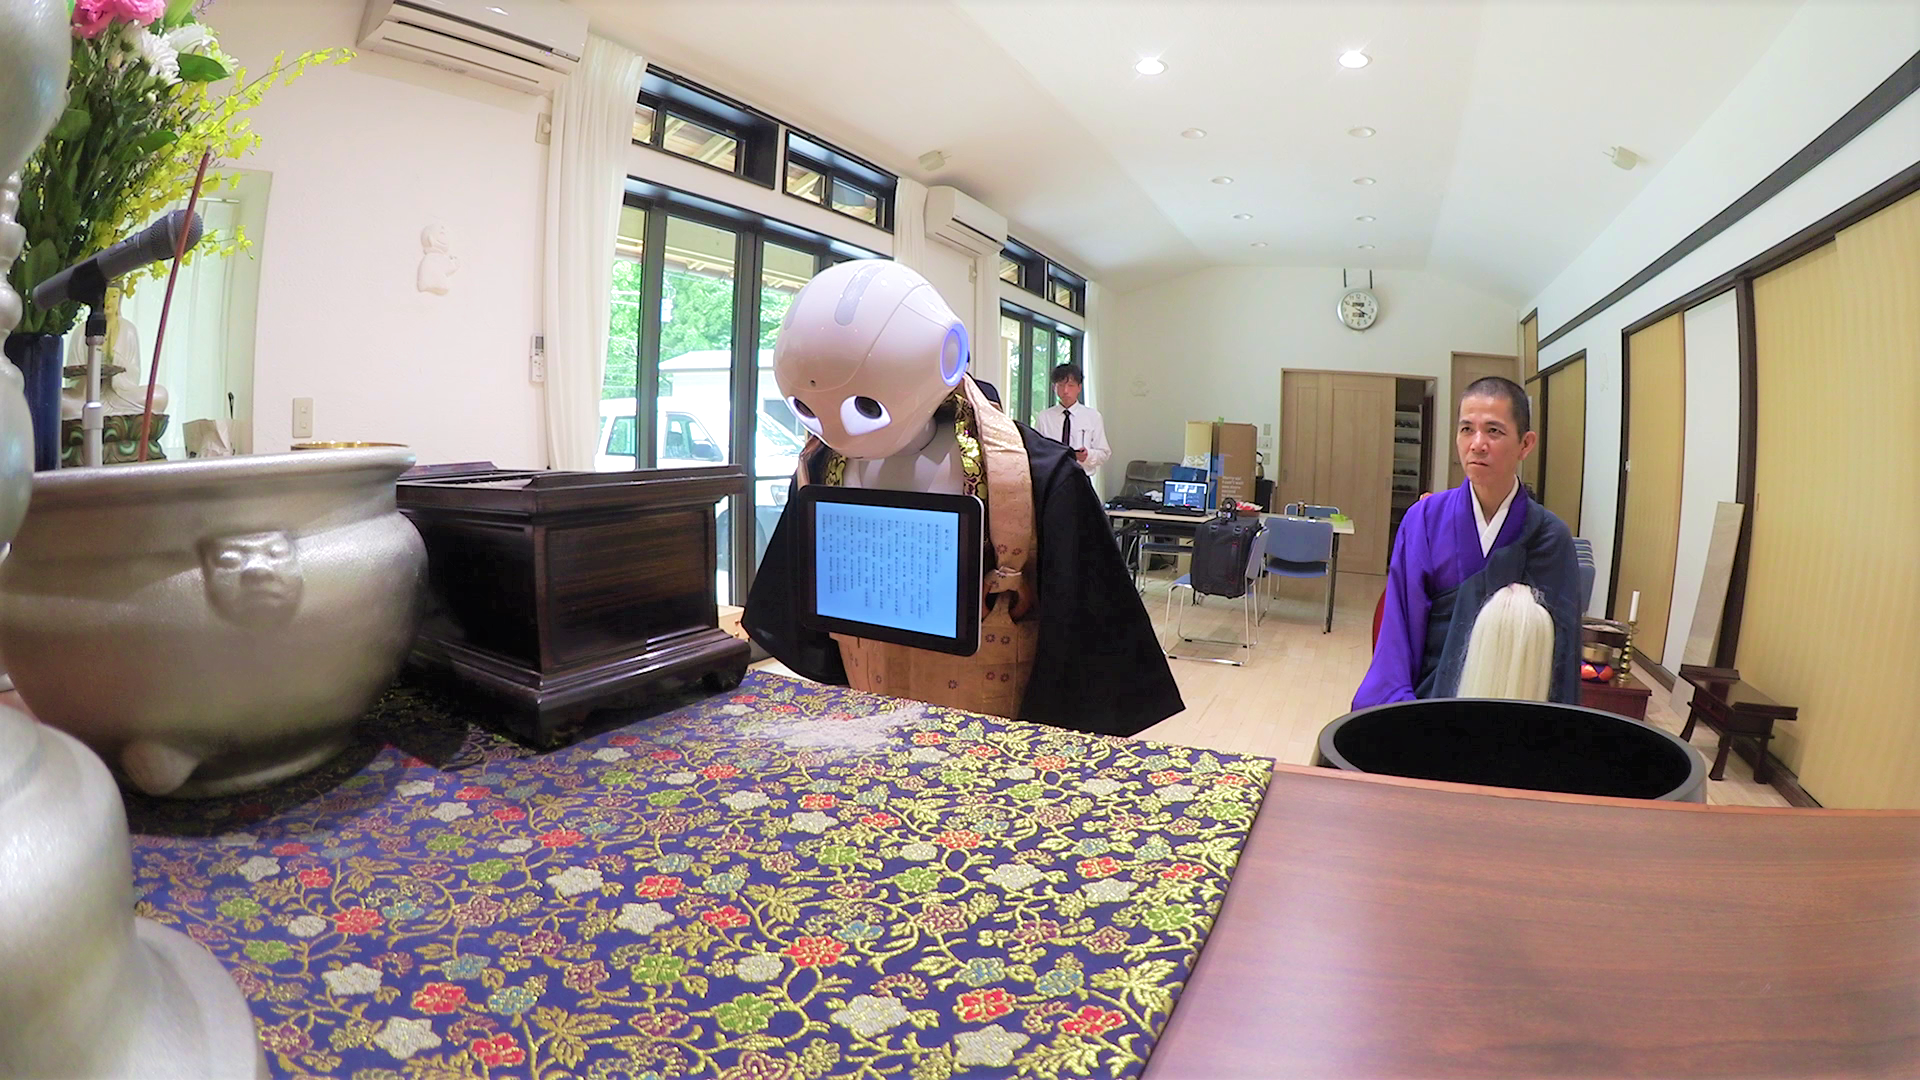 Pepper, the robot created by SoftBank Robotics, bows during a Buddhist ritual with a monk at a temple in Yokohama on July 20. Nissei Eco Co. has programmed Pepper to recite sutras as part of its expanded funeral service business. | COURTESY OF NISSEI ECO CO.